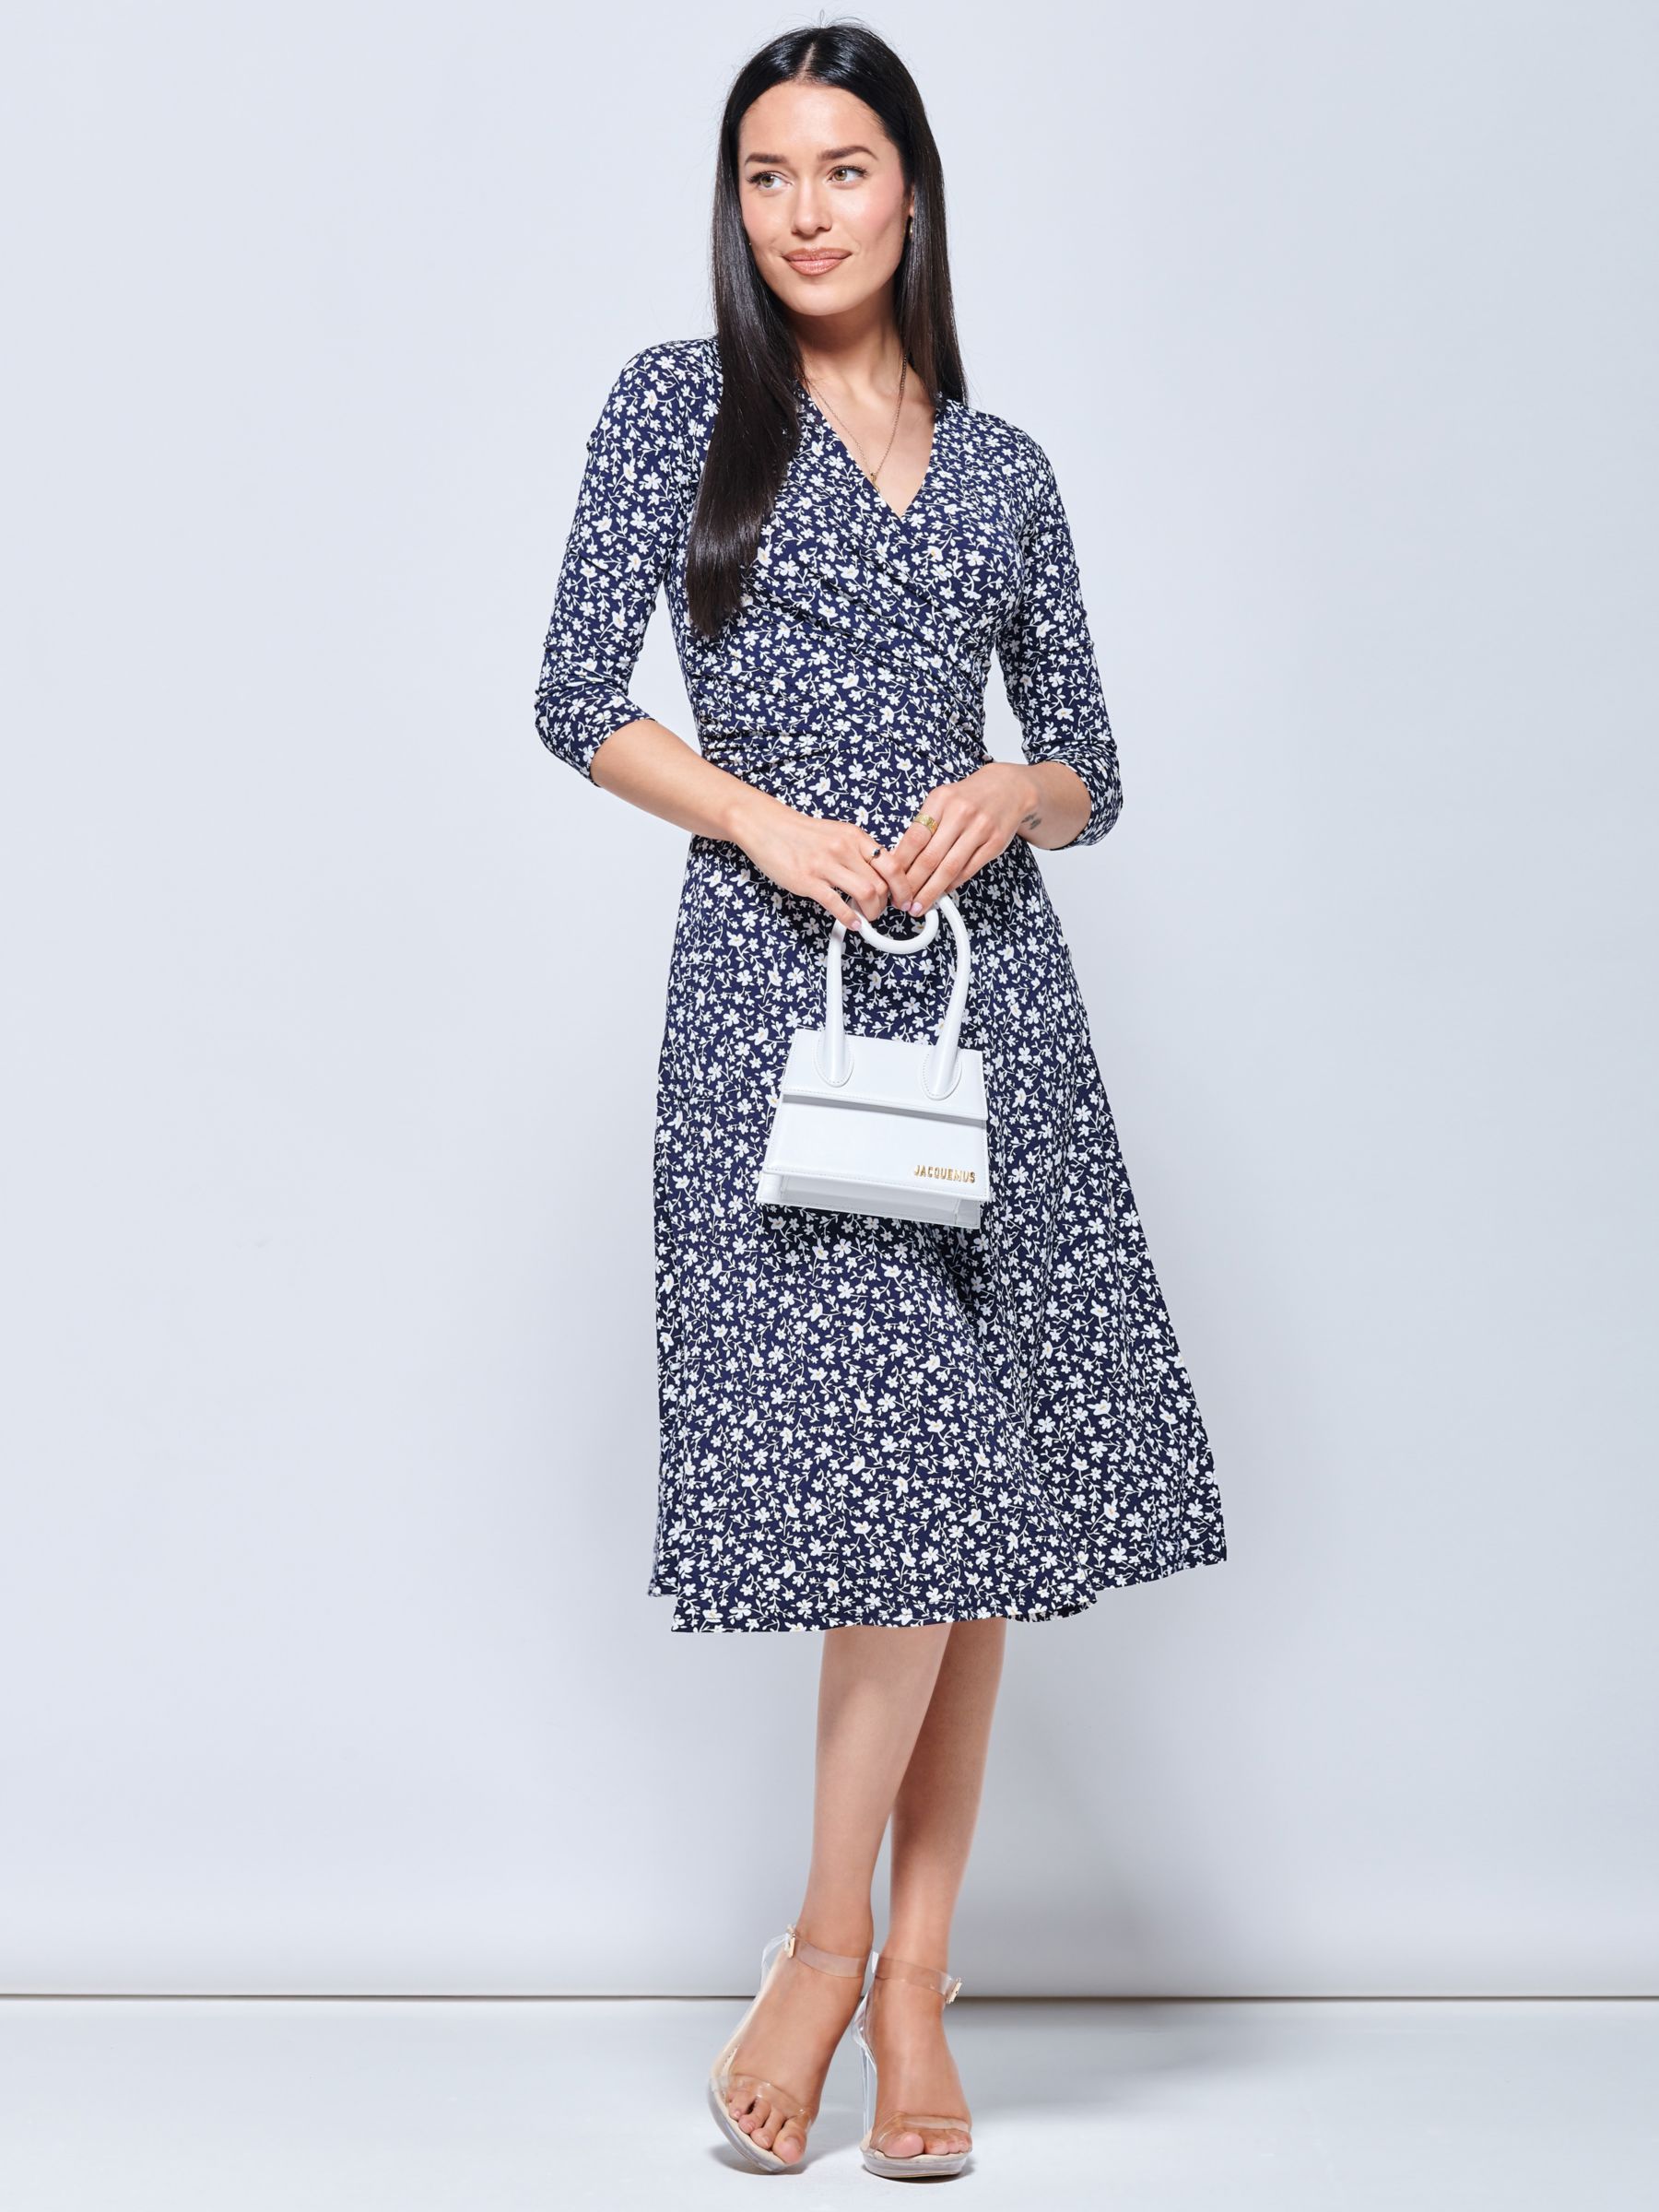 Jolie Moi Gretta Floral Print Jersey Fit and Flare Dress, Navy, 16